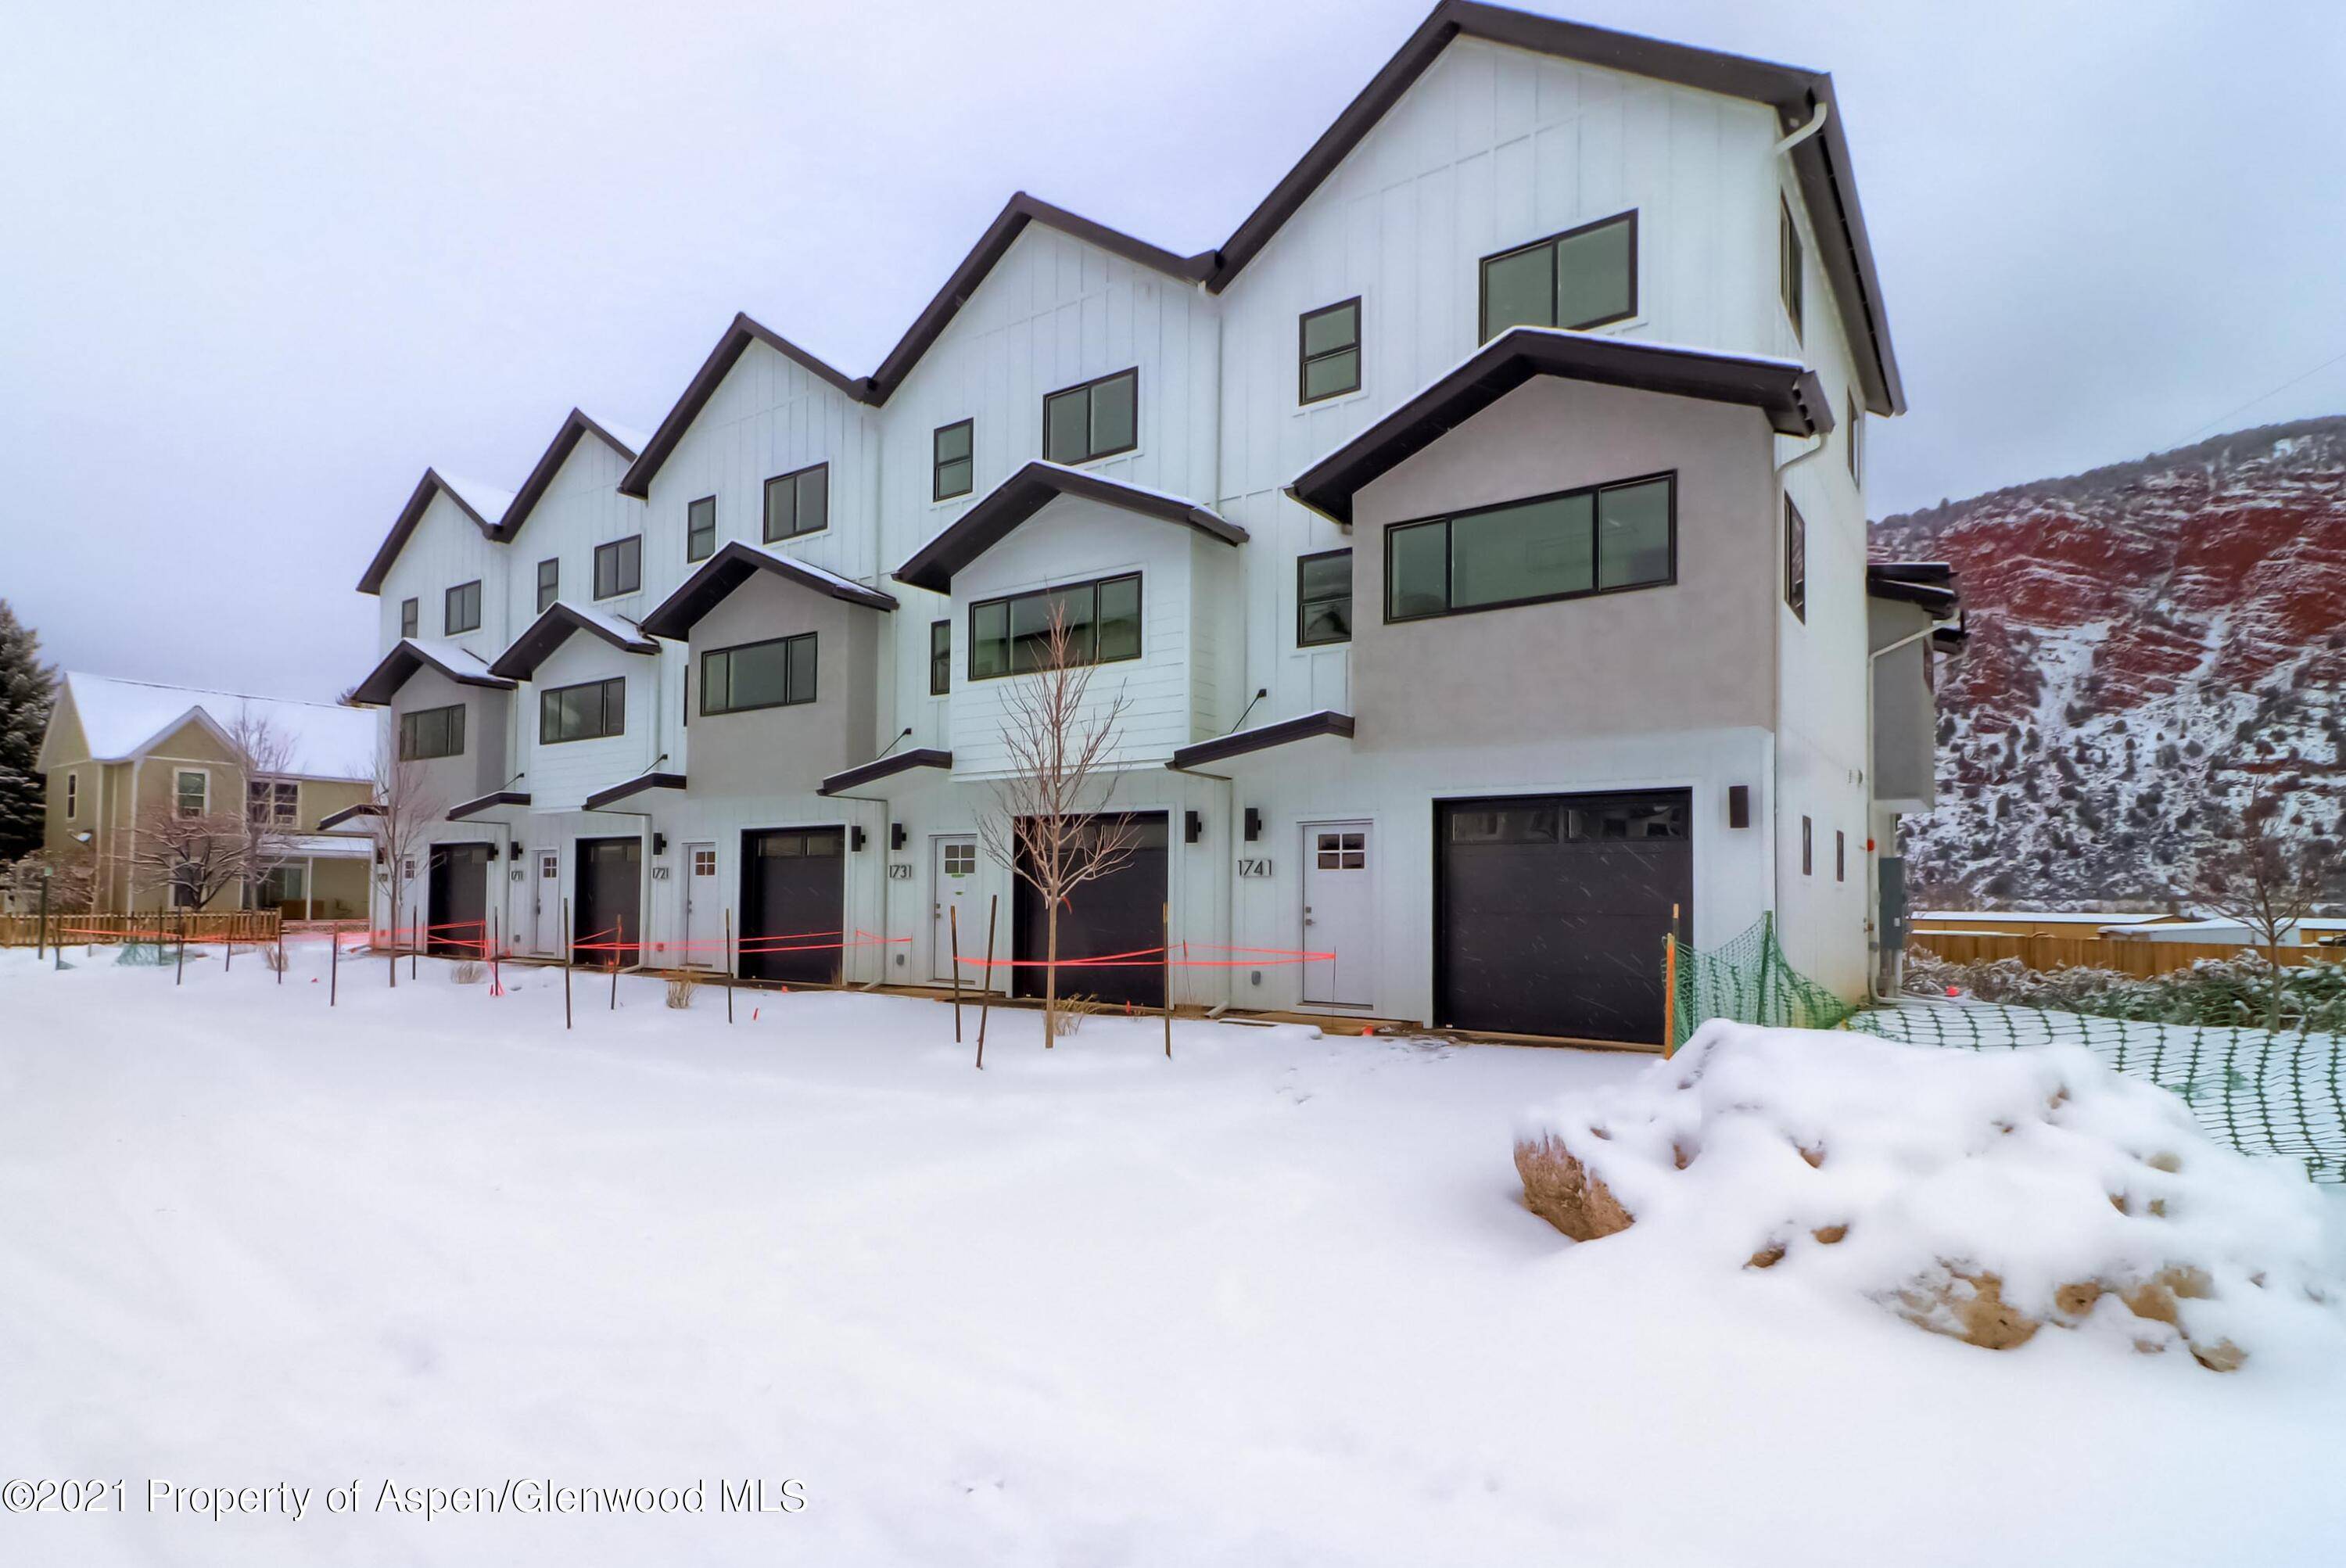 Looking for a newly built condominium in a beautiful Colorado mountain town !